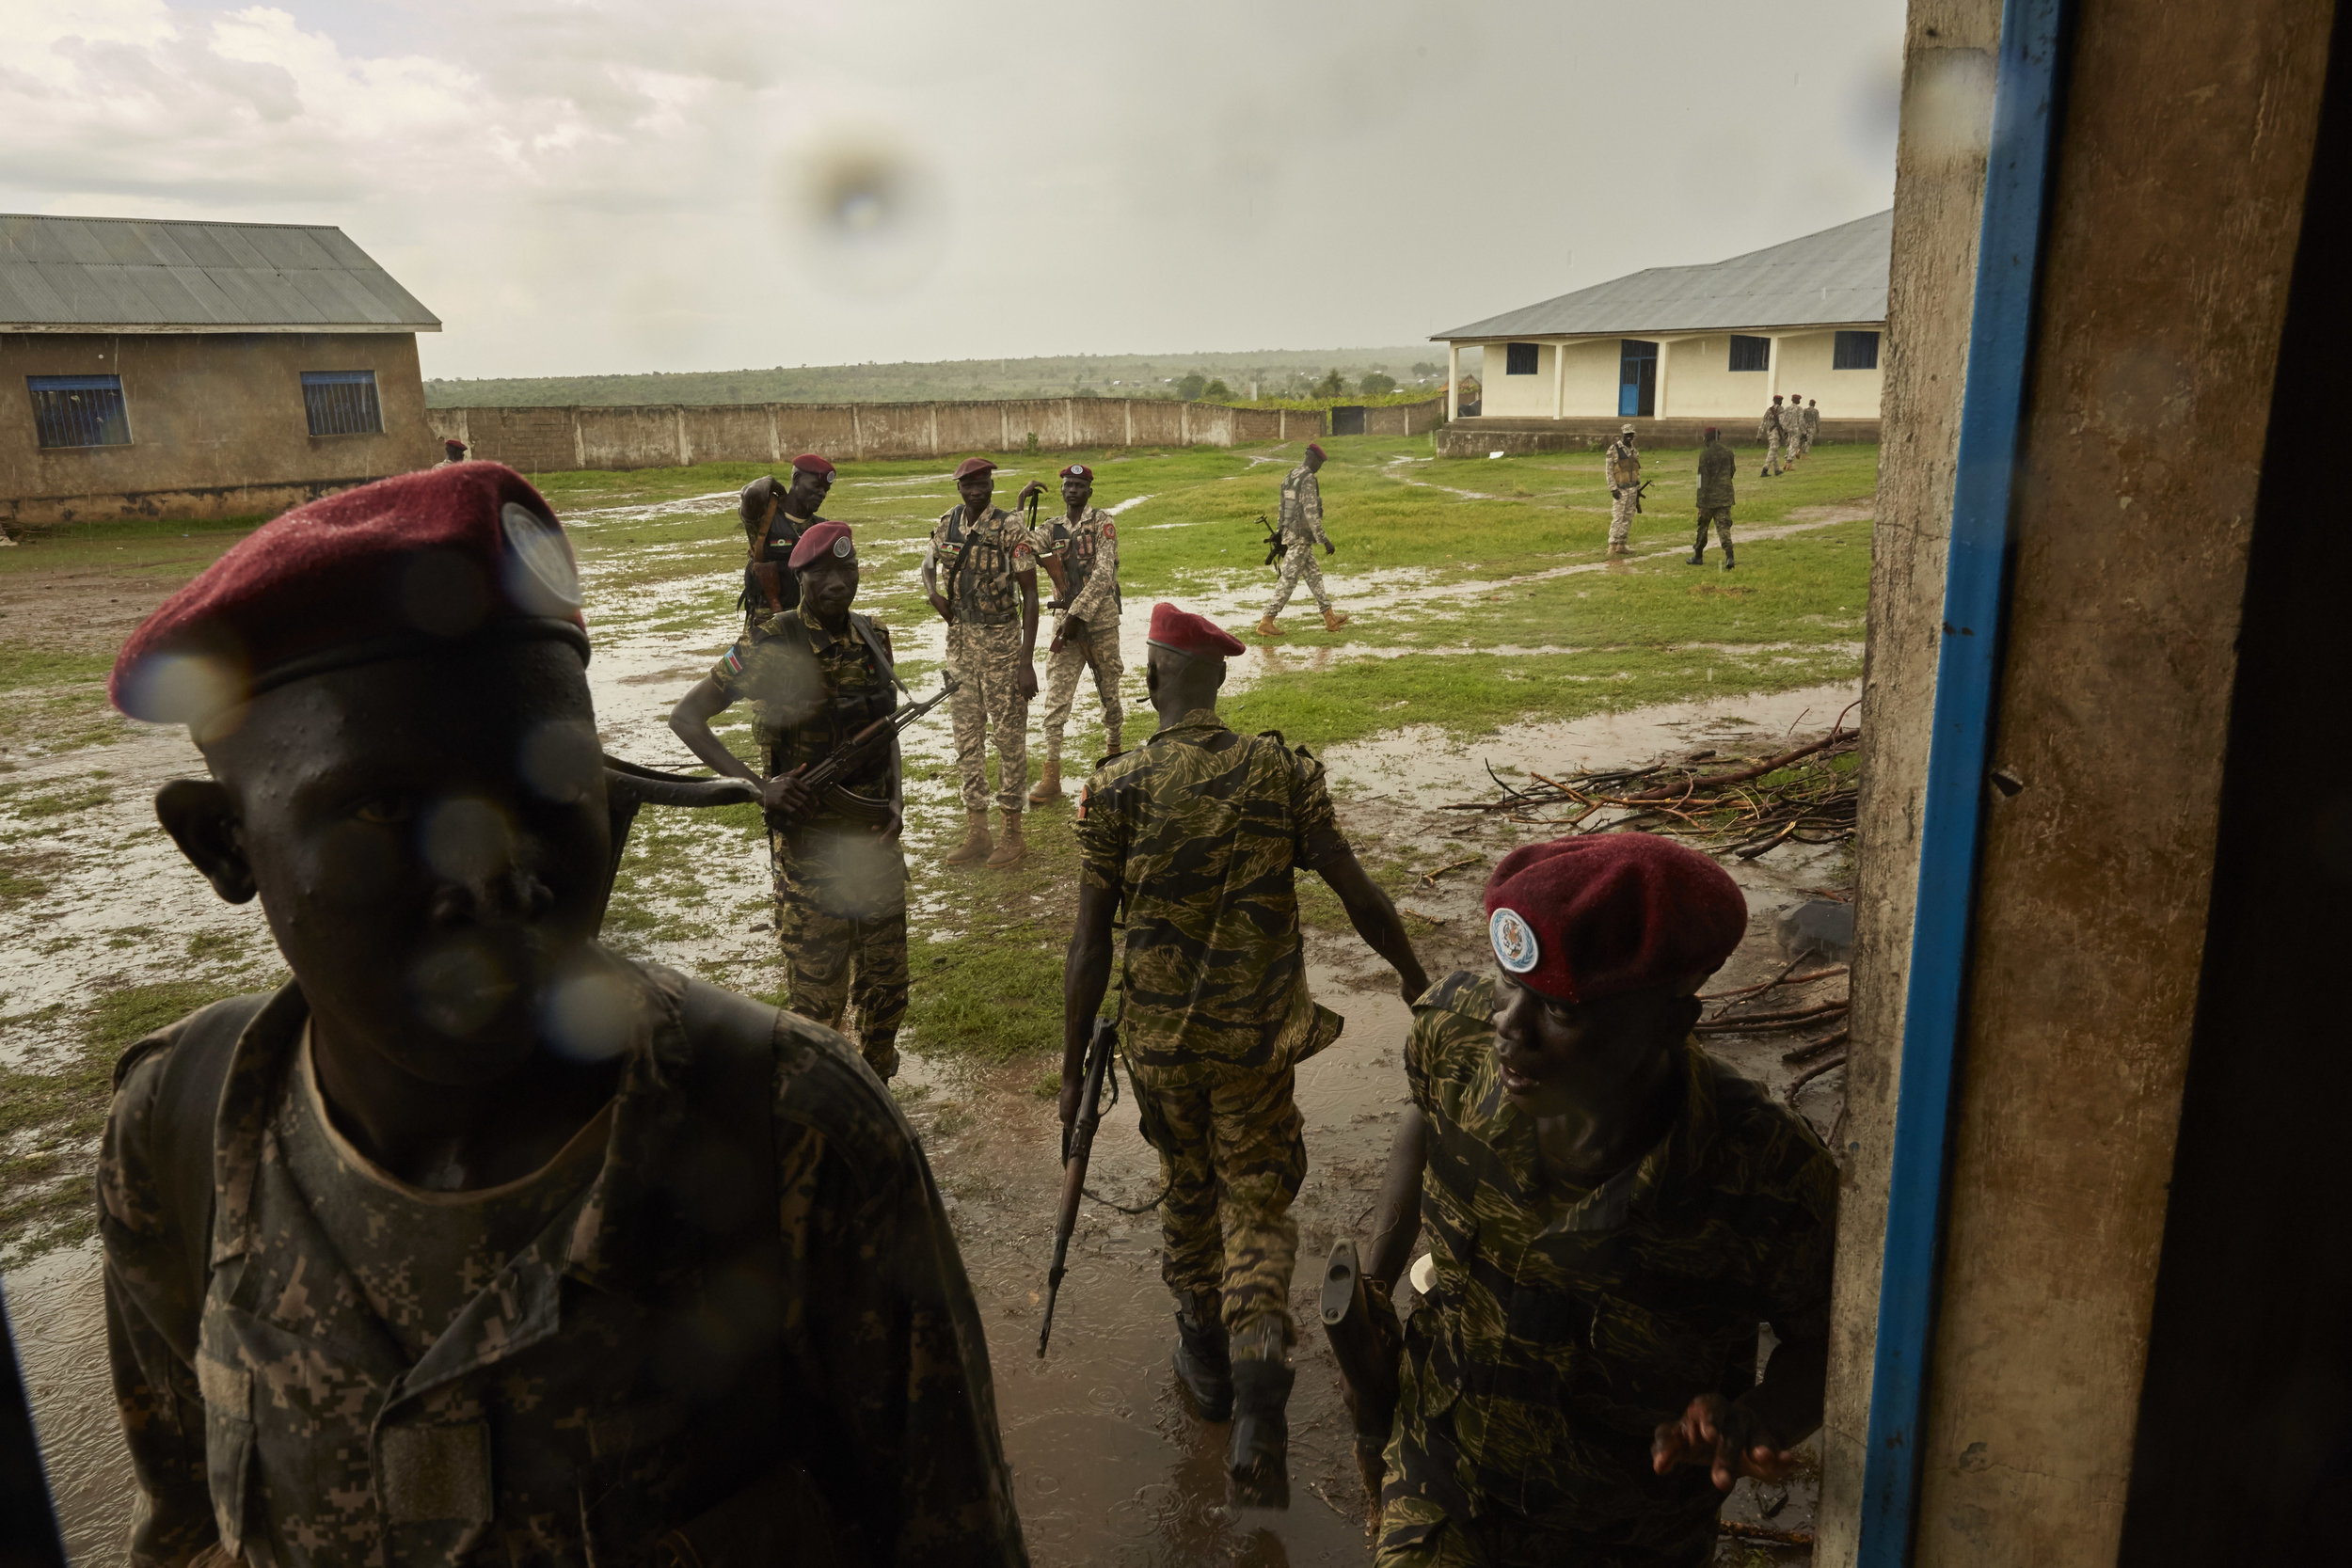 Tiger Battalion soldiers from the South Sudan People's Defence Force (SSPDF) in Juba, South Sudan